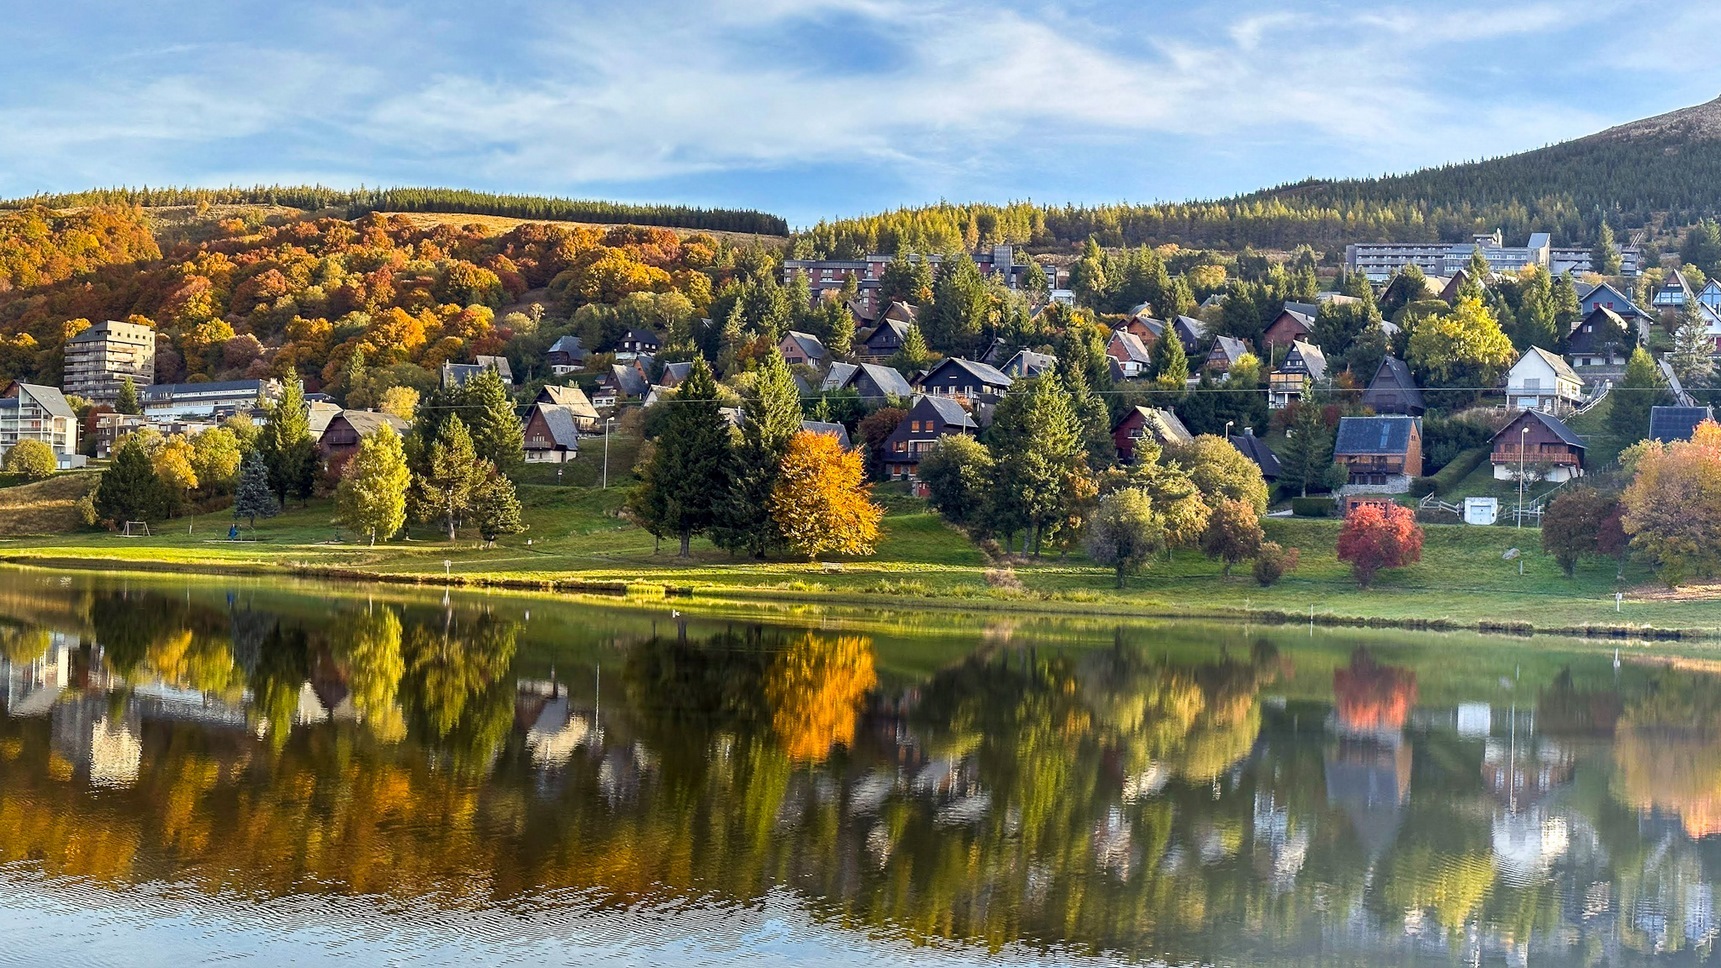 Super Besse in Autumn, pretty reflections on the Lac des Hermines in Super Besse